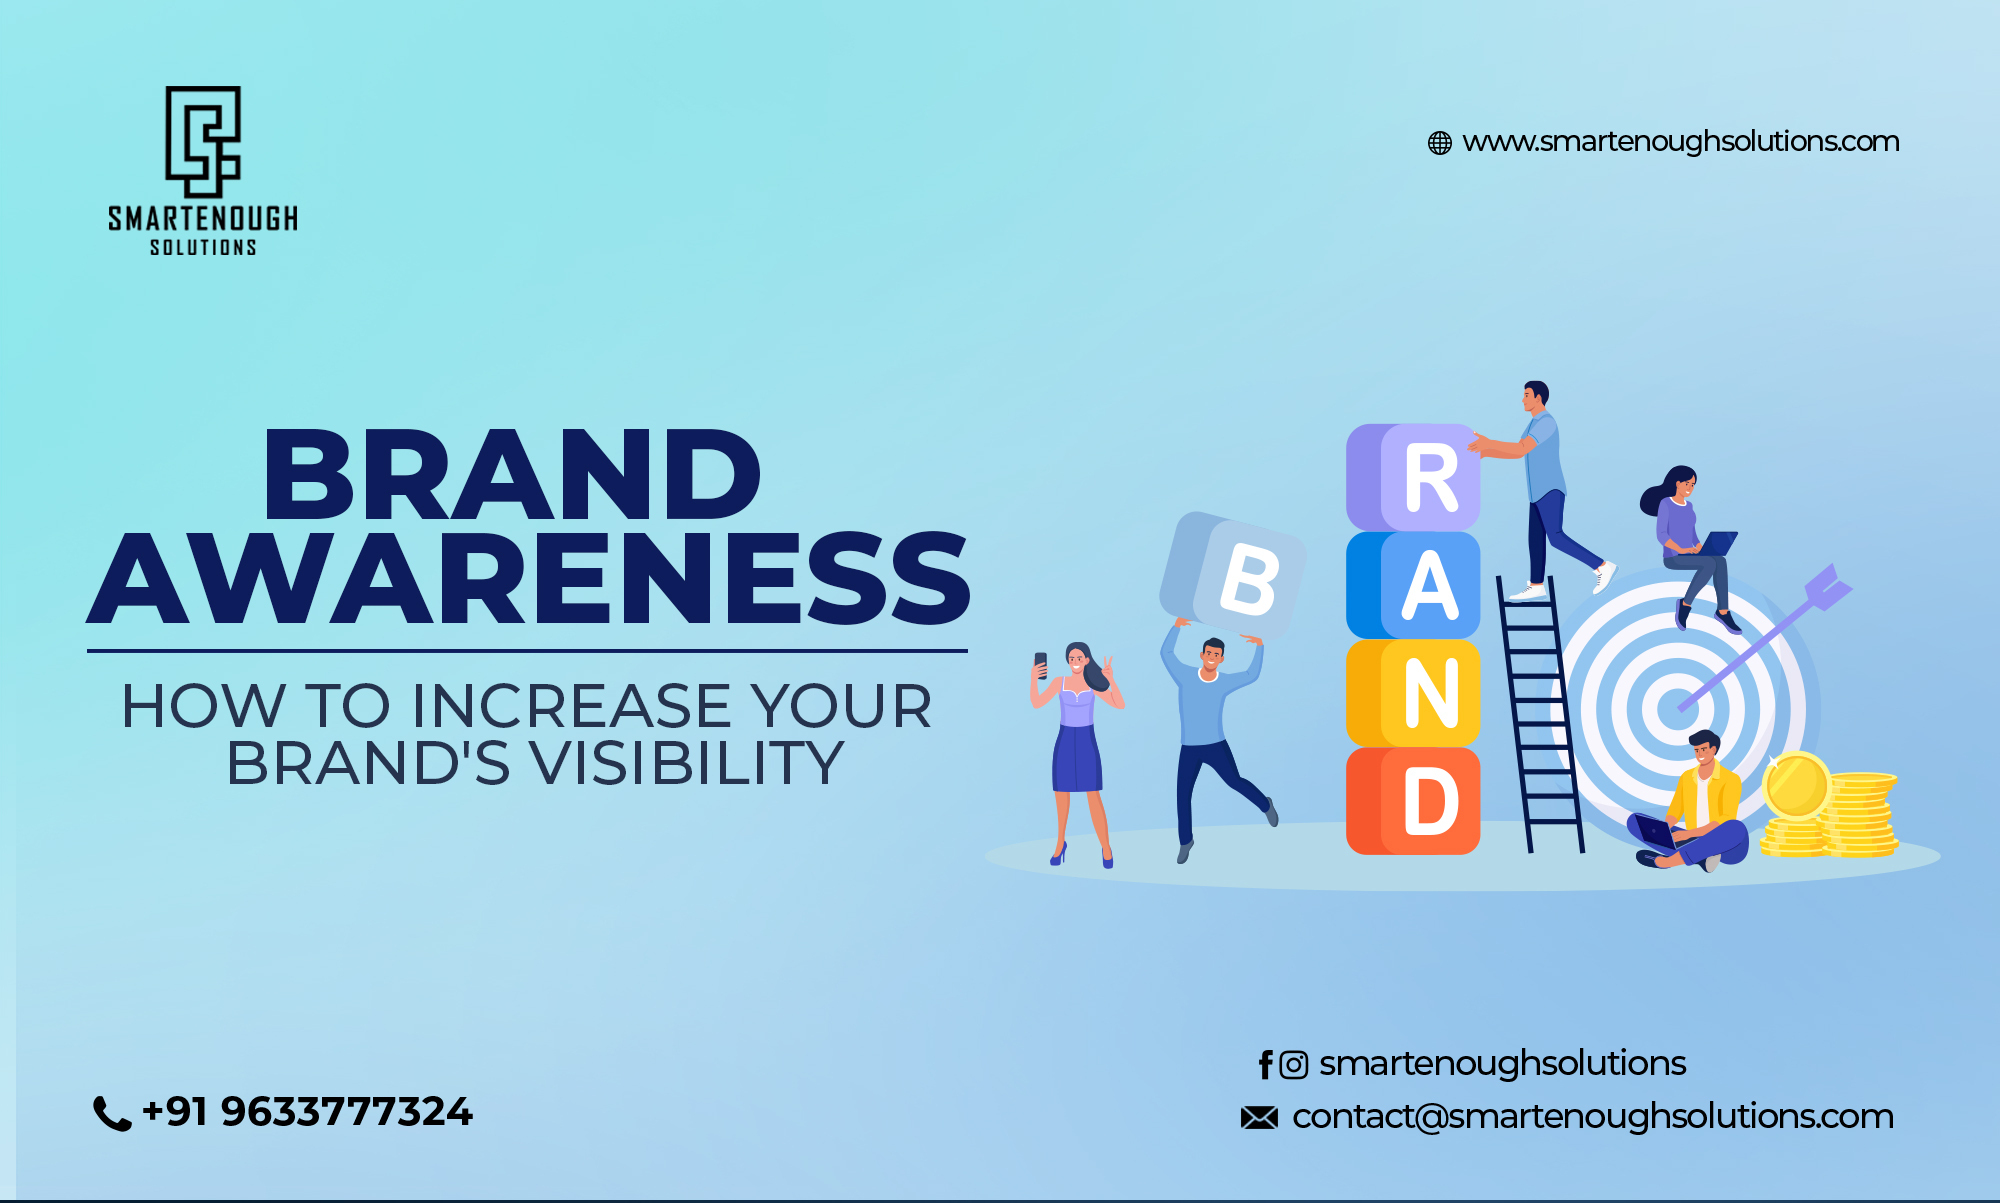 Brand Awareness: How to Increase Your Brand’s Visibility